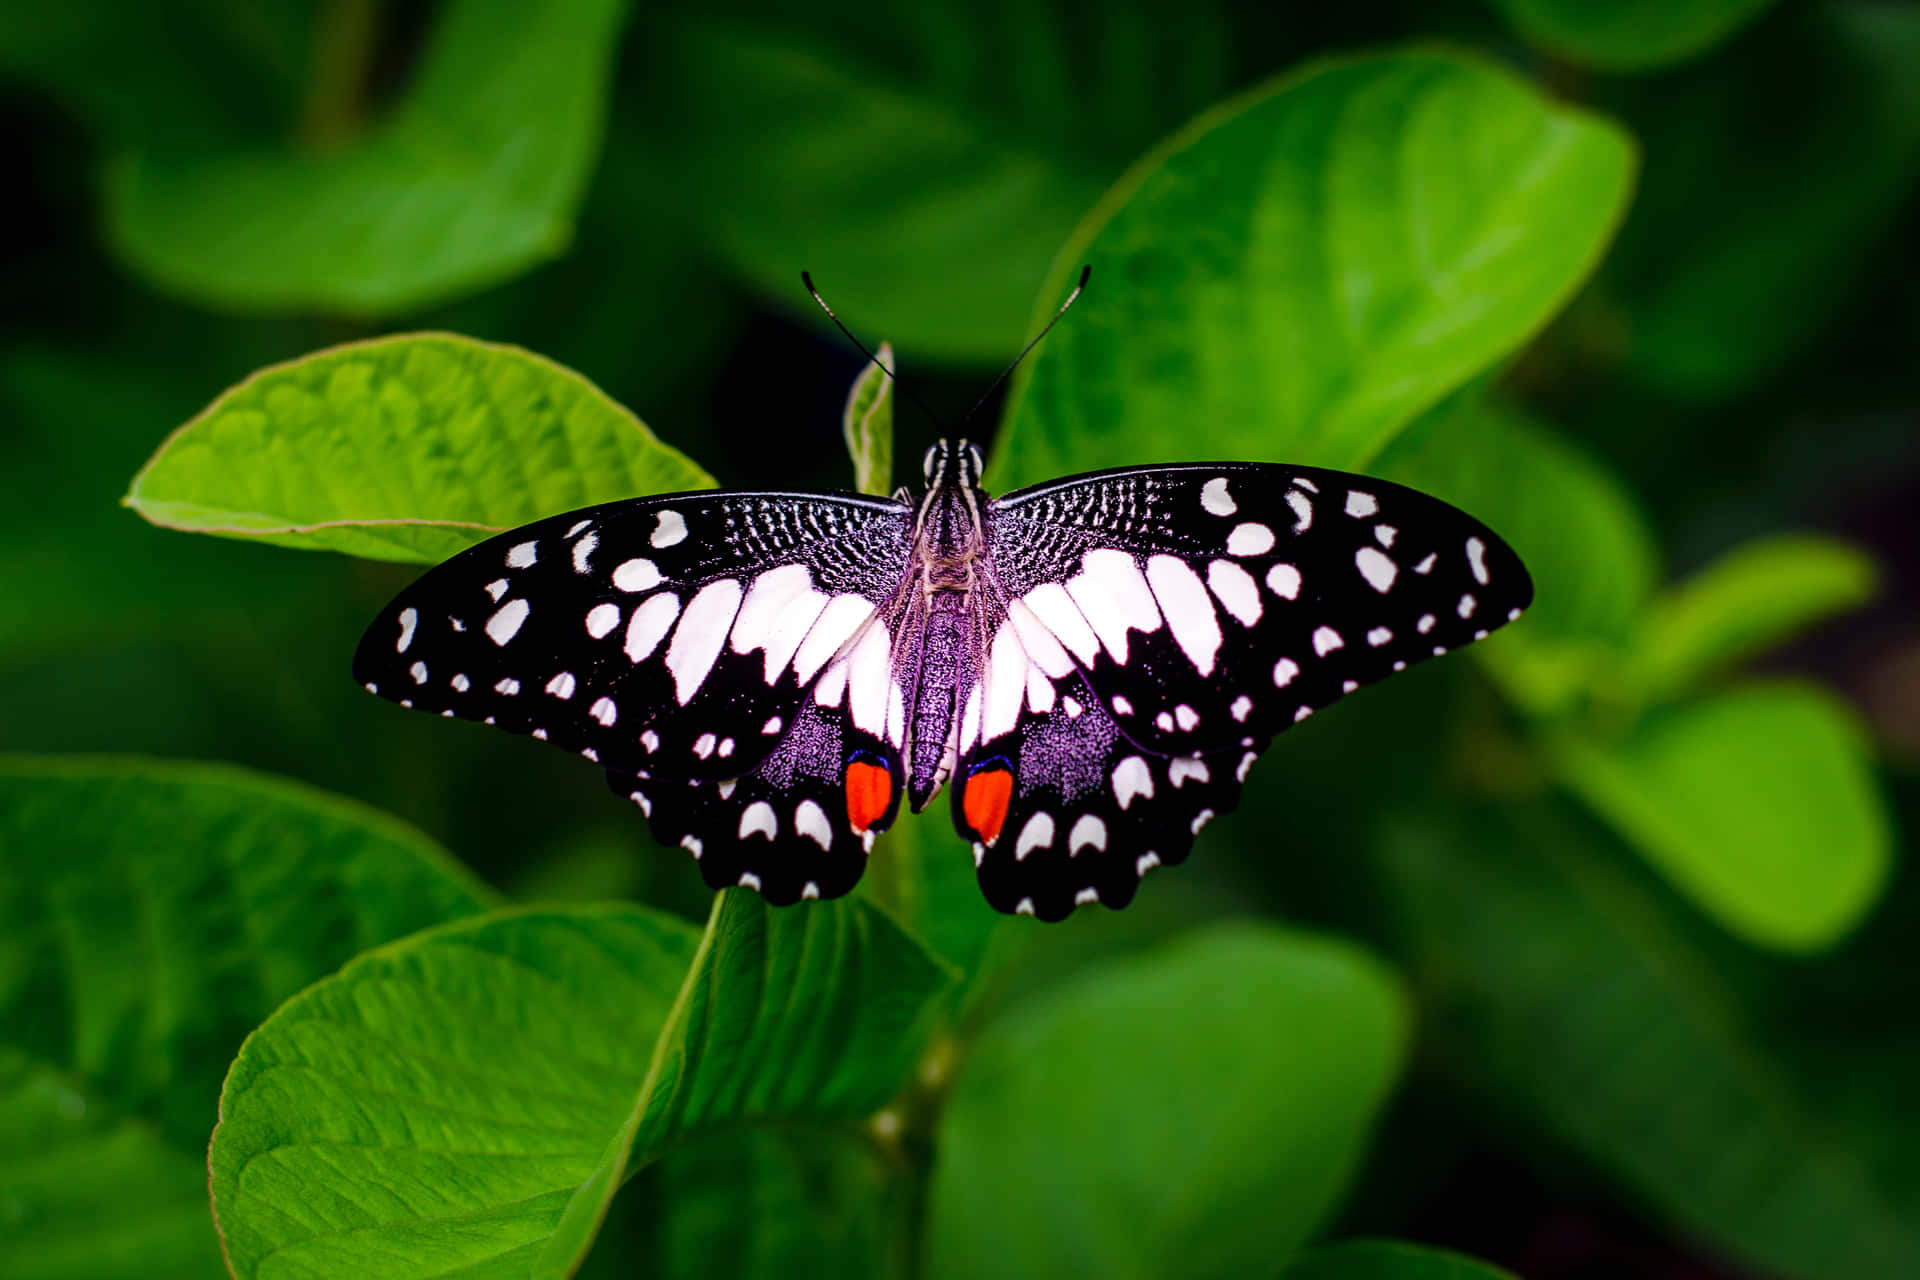 A colorful butterfly spotted resting on the keys of a sleek laptop Wallpaper